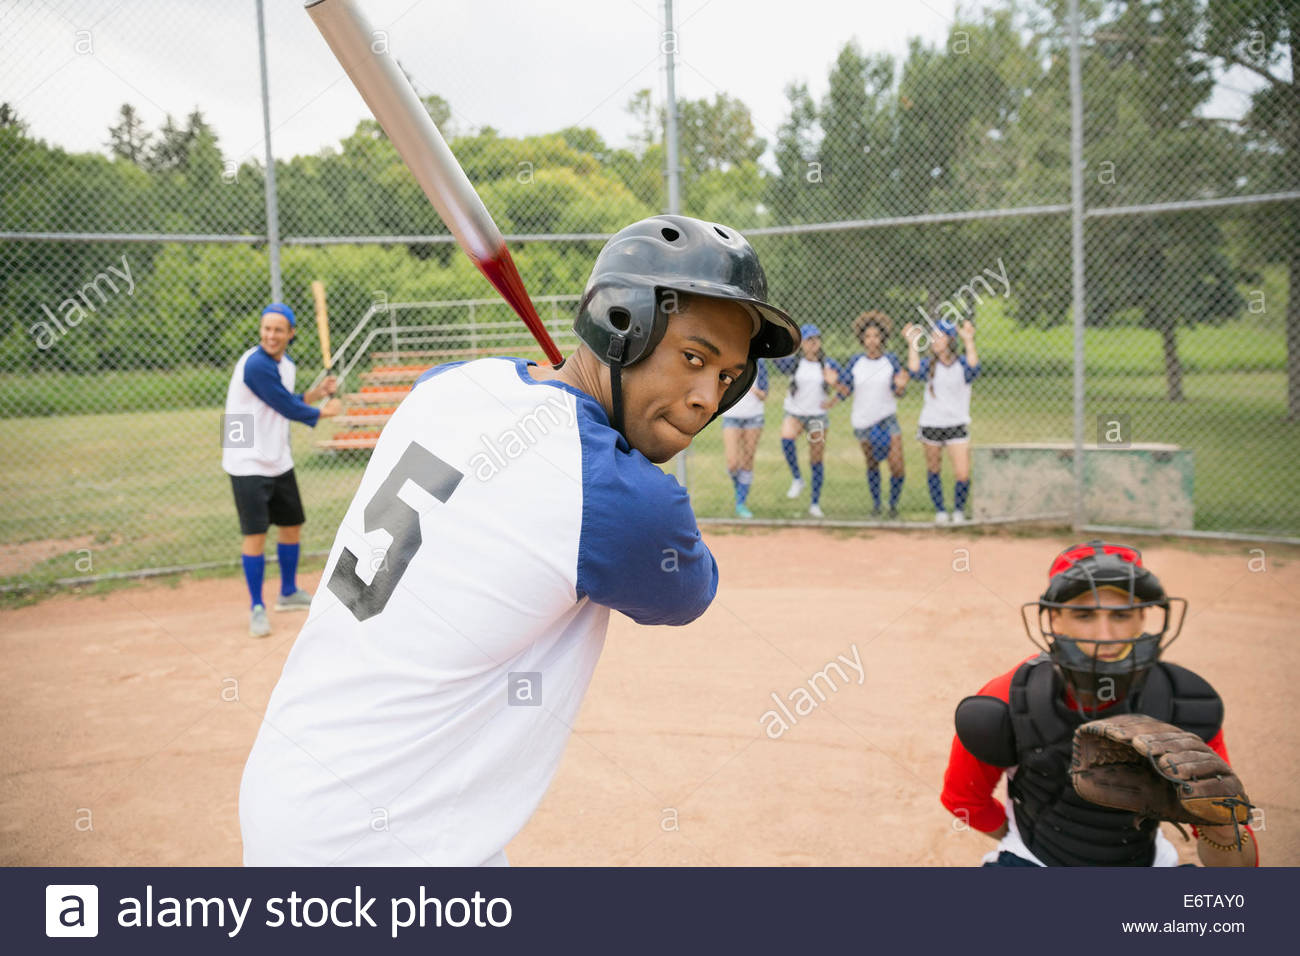 Baseball player ready for ball at home plate Stock Photo